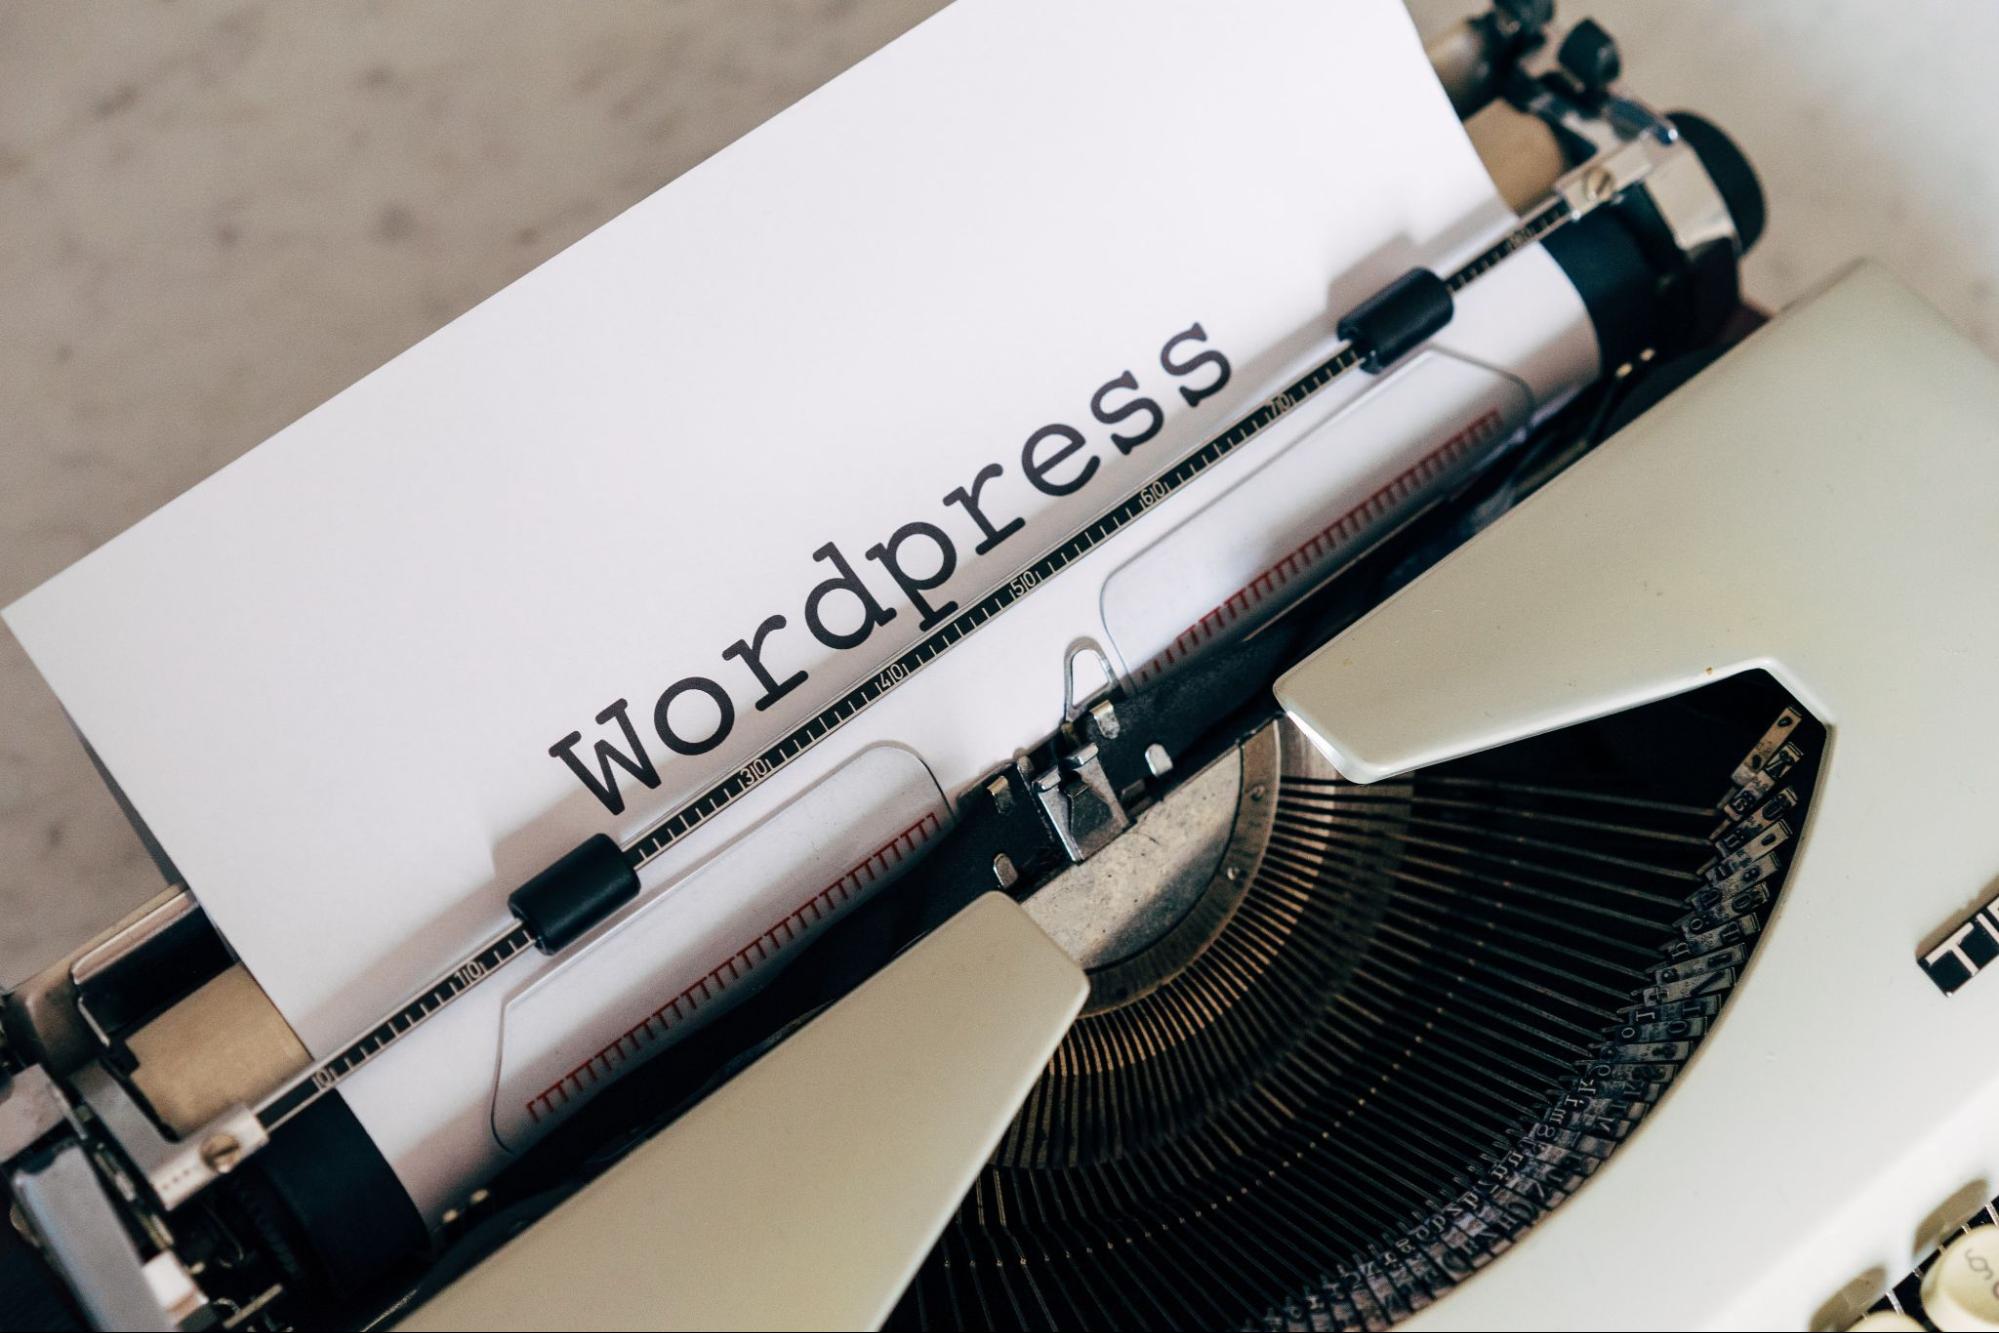 Top 5 WordPress Themes for Professional Business Websites